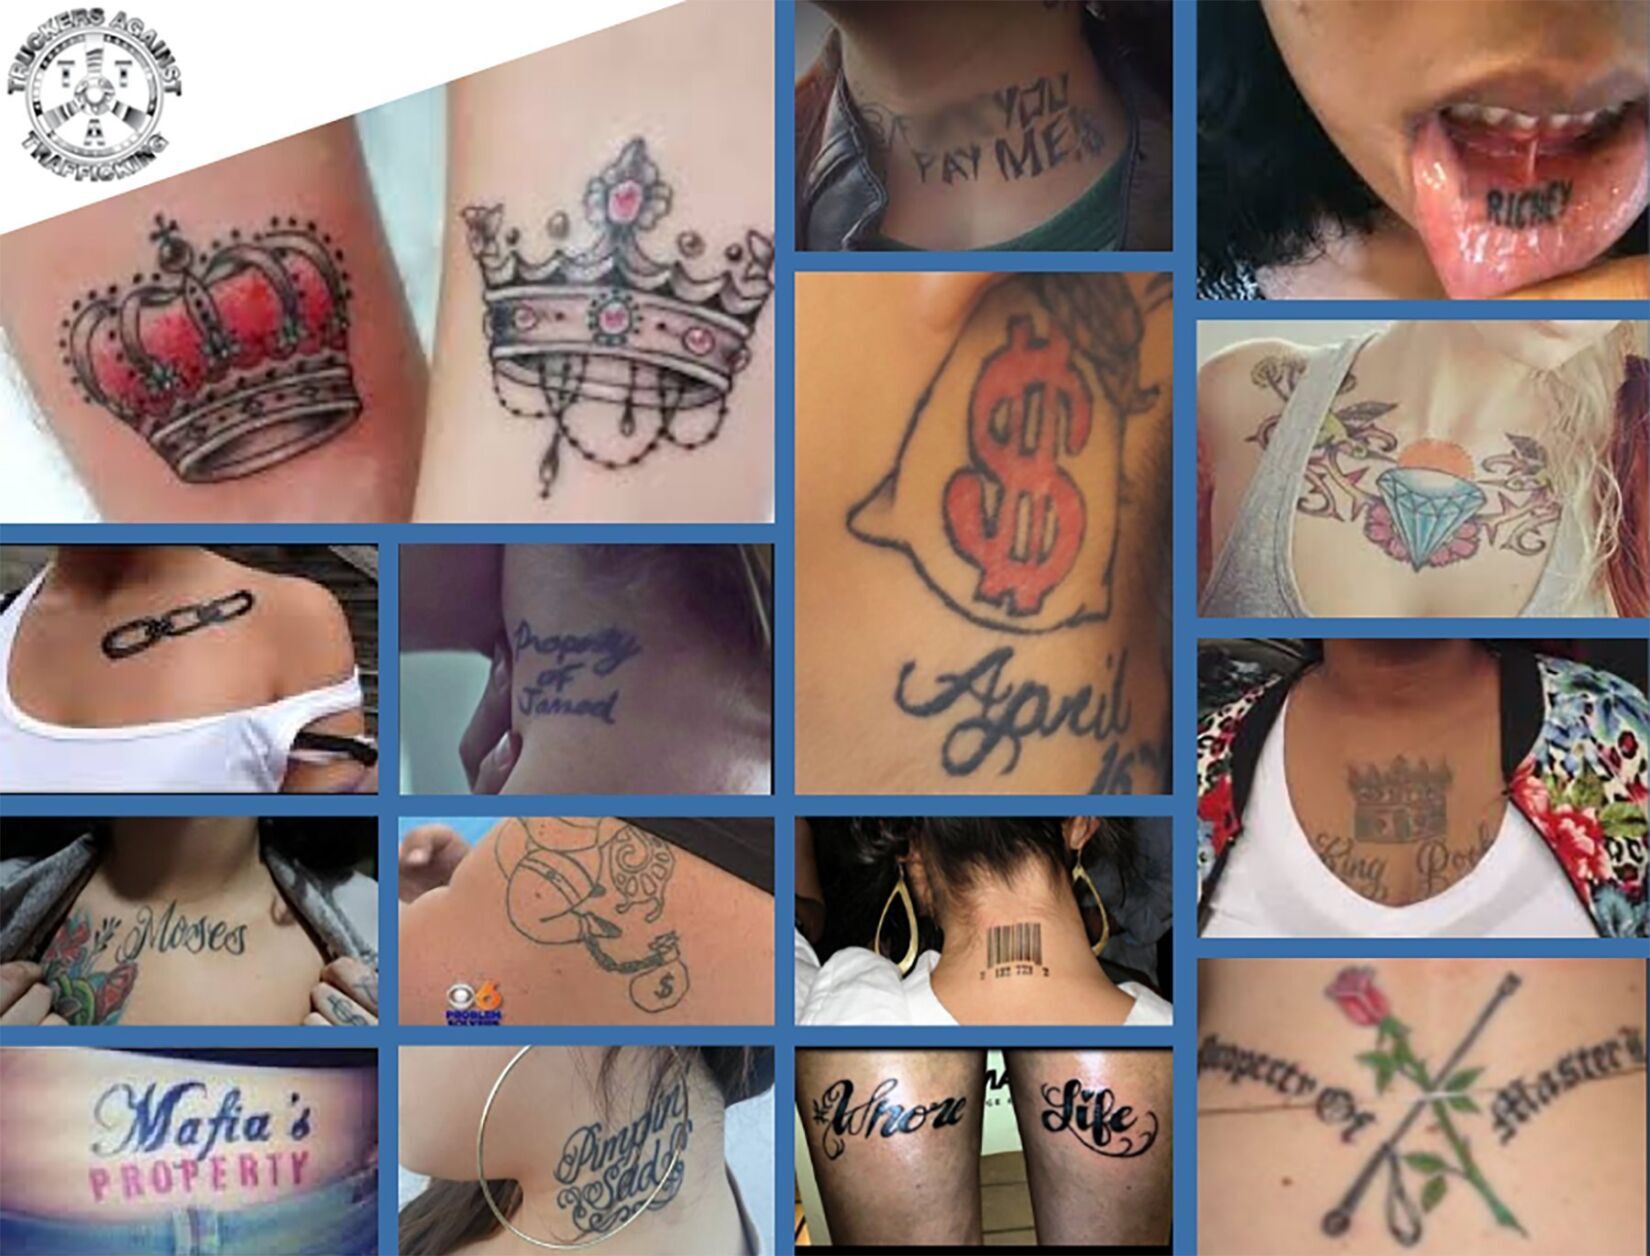 Human trafficking tattoos are turned into symbols of triumph thanks to  Atlanta group  WTGS